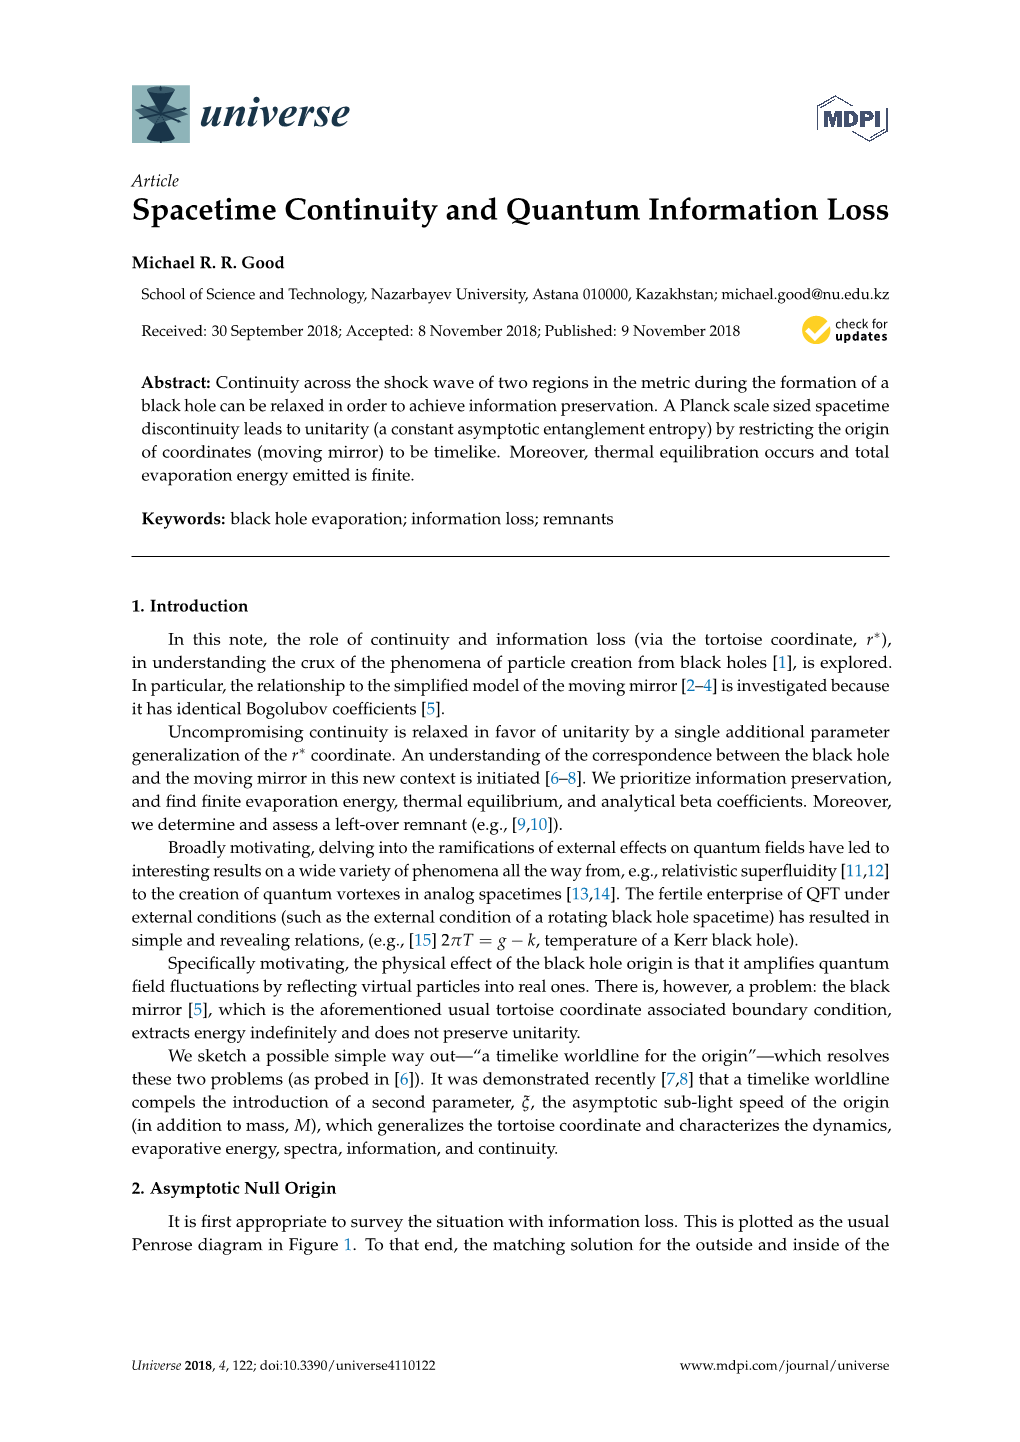 Spacetime Continuity and Quantum Information Loss